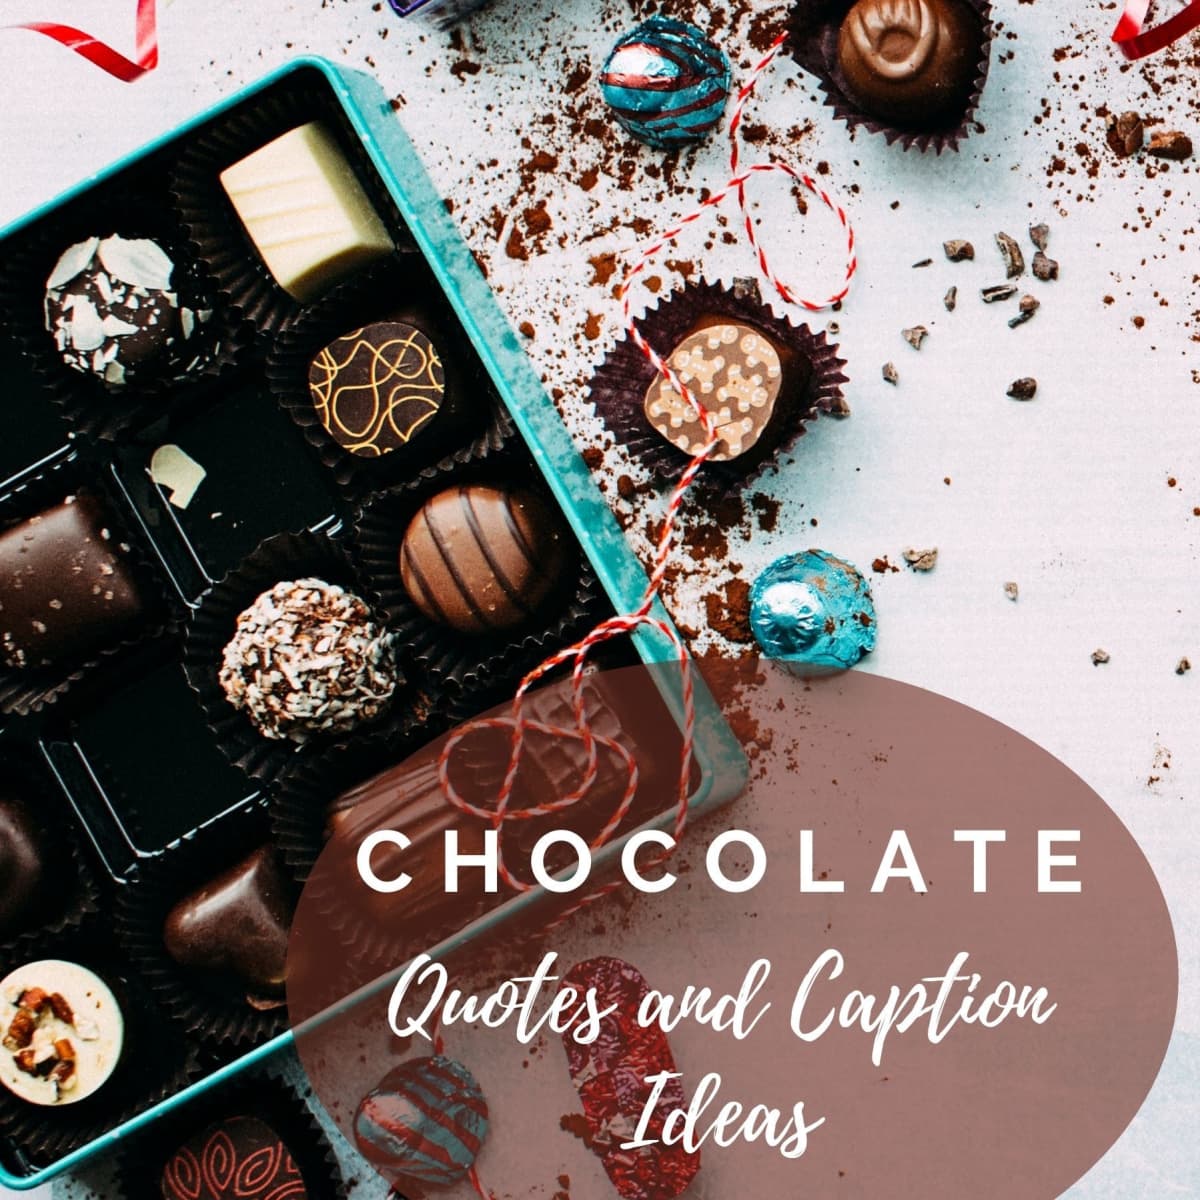 Poses with Chocolate | Self portrait photography, Portrait photography,  Chocolate bites